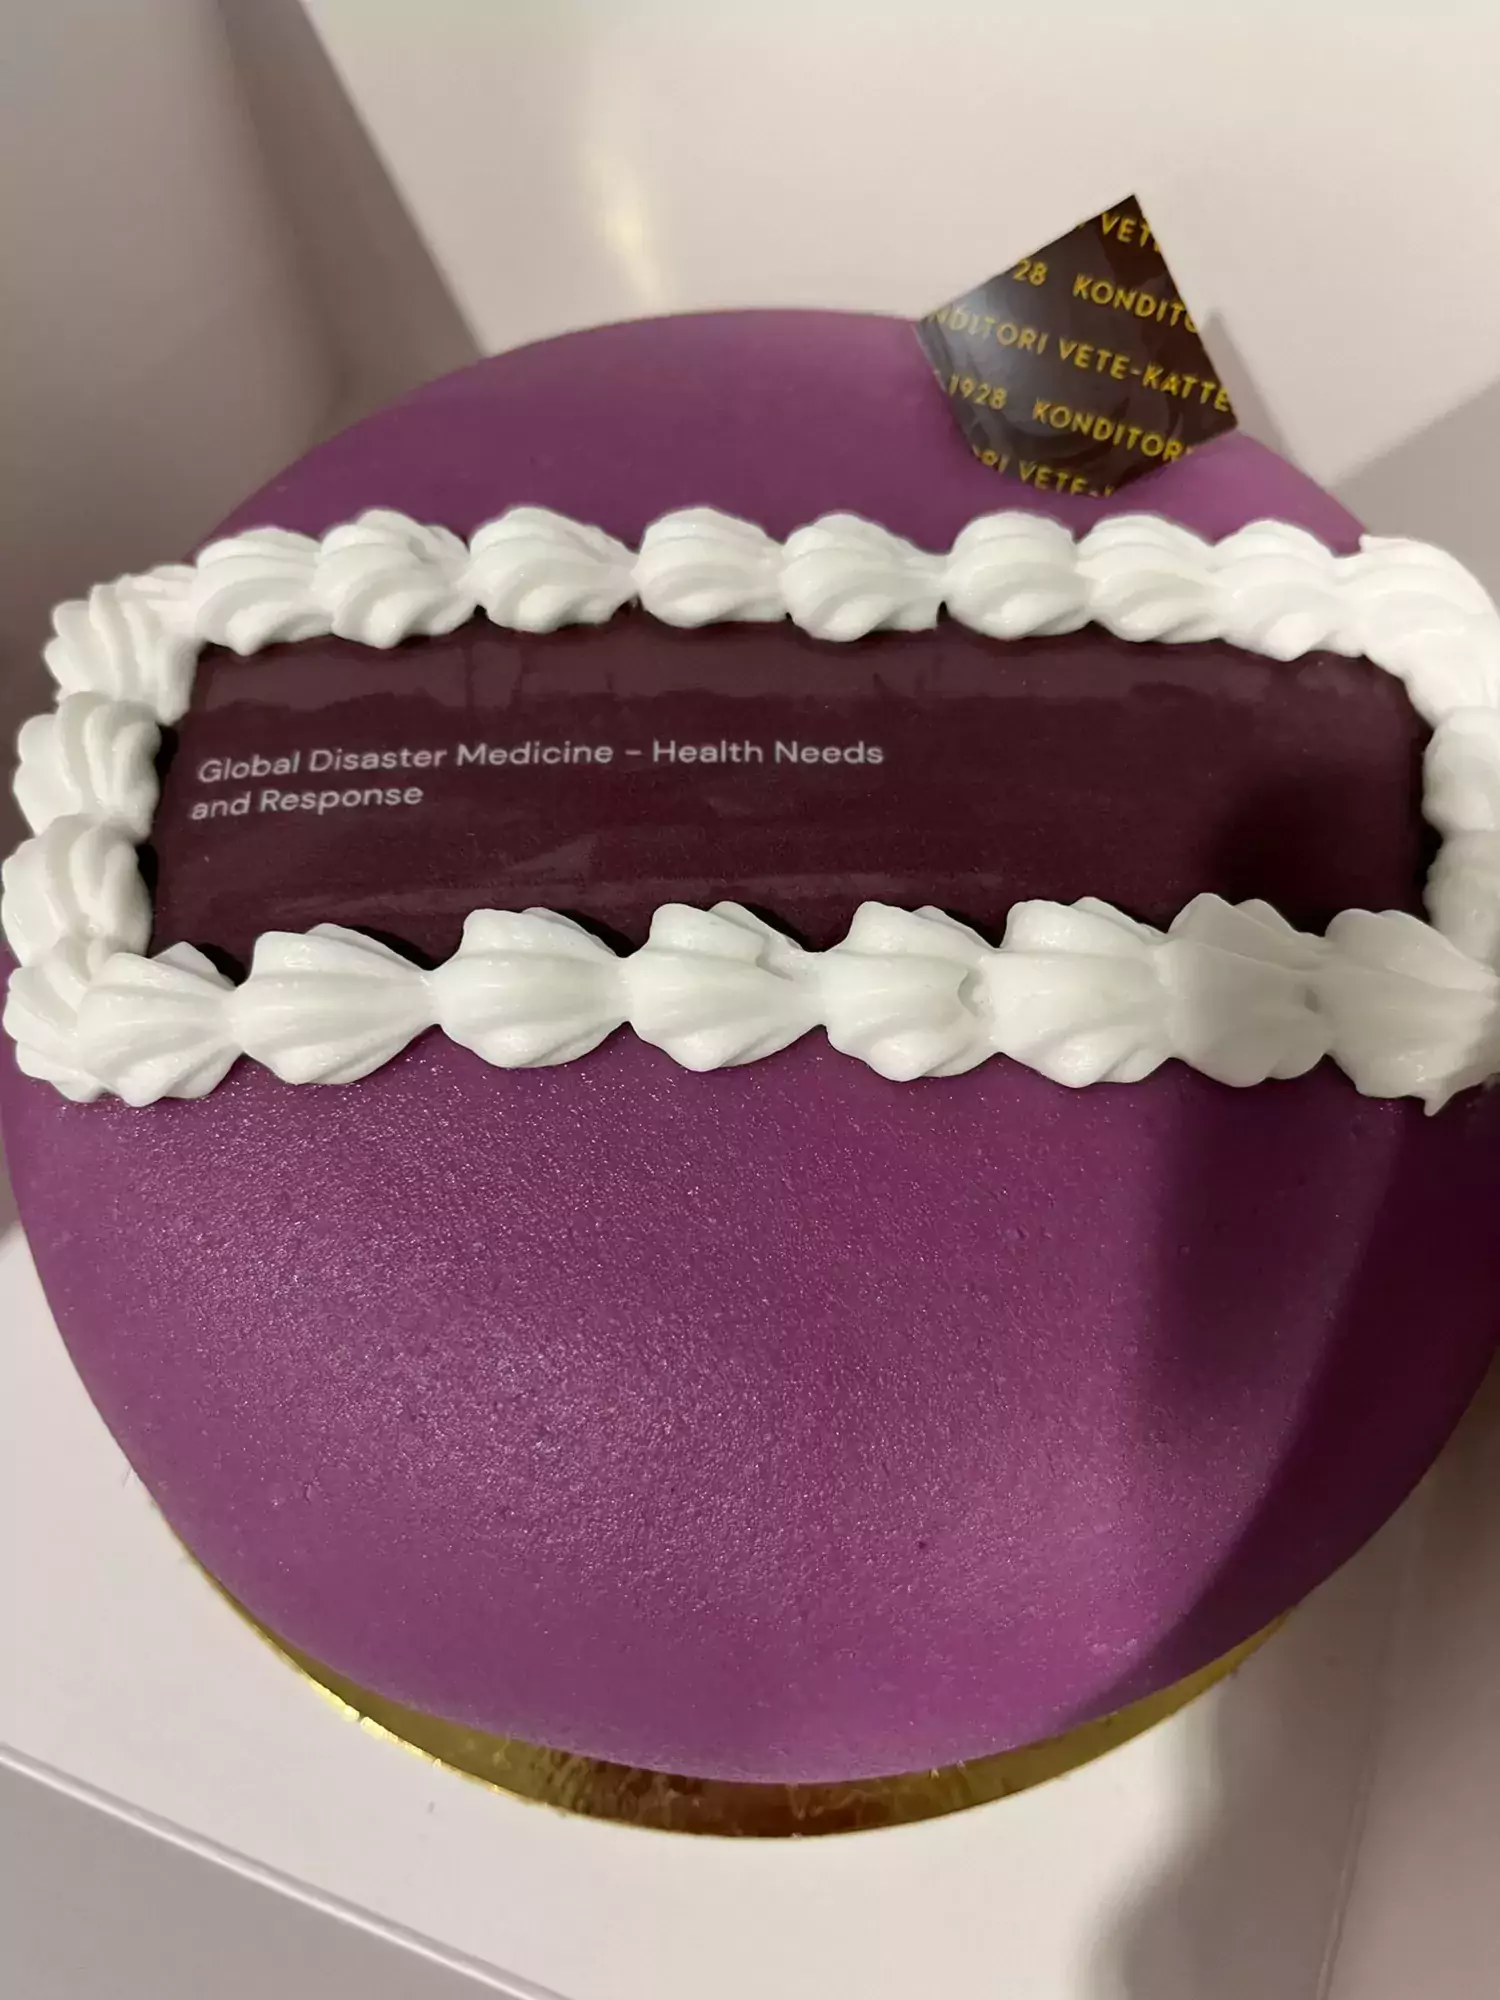 Cake with purple frosting and the words Global Disaster Medicine - Health Needs and Response written on it